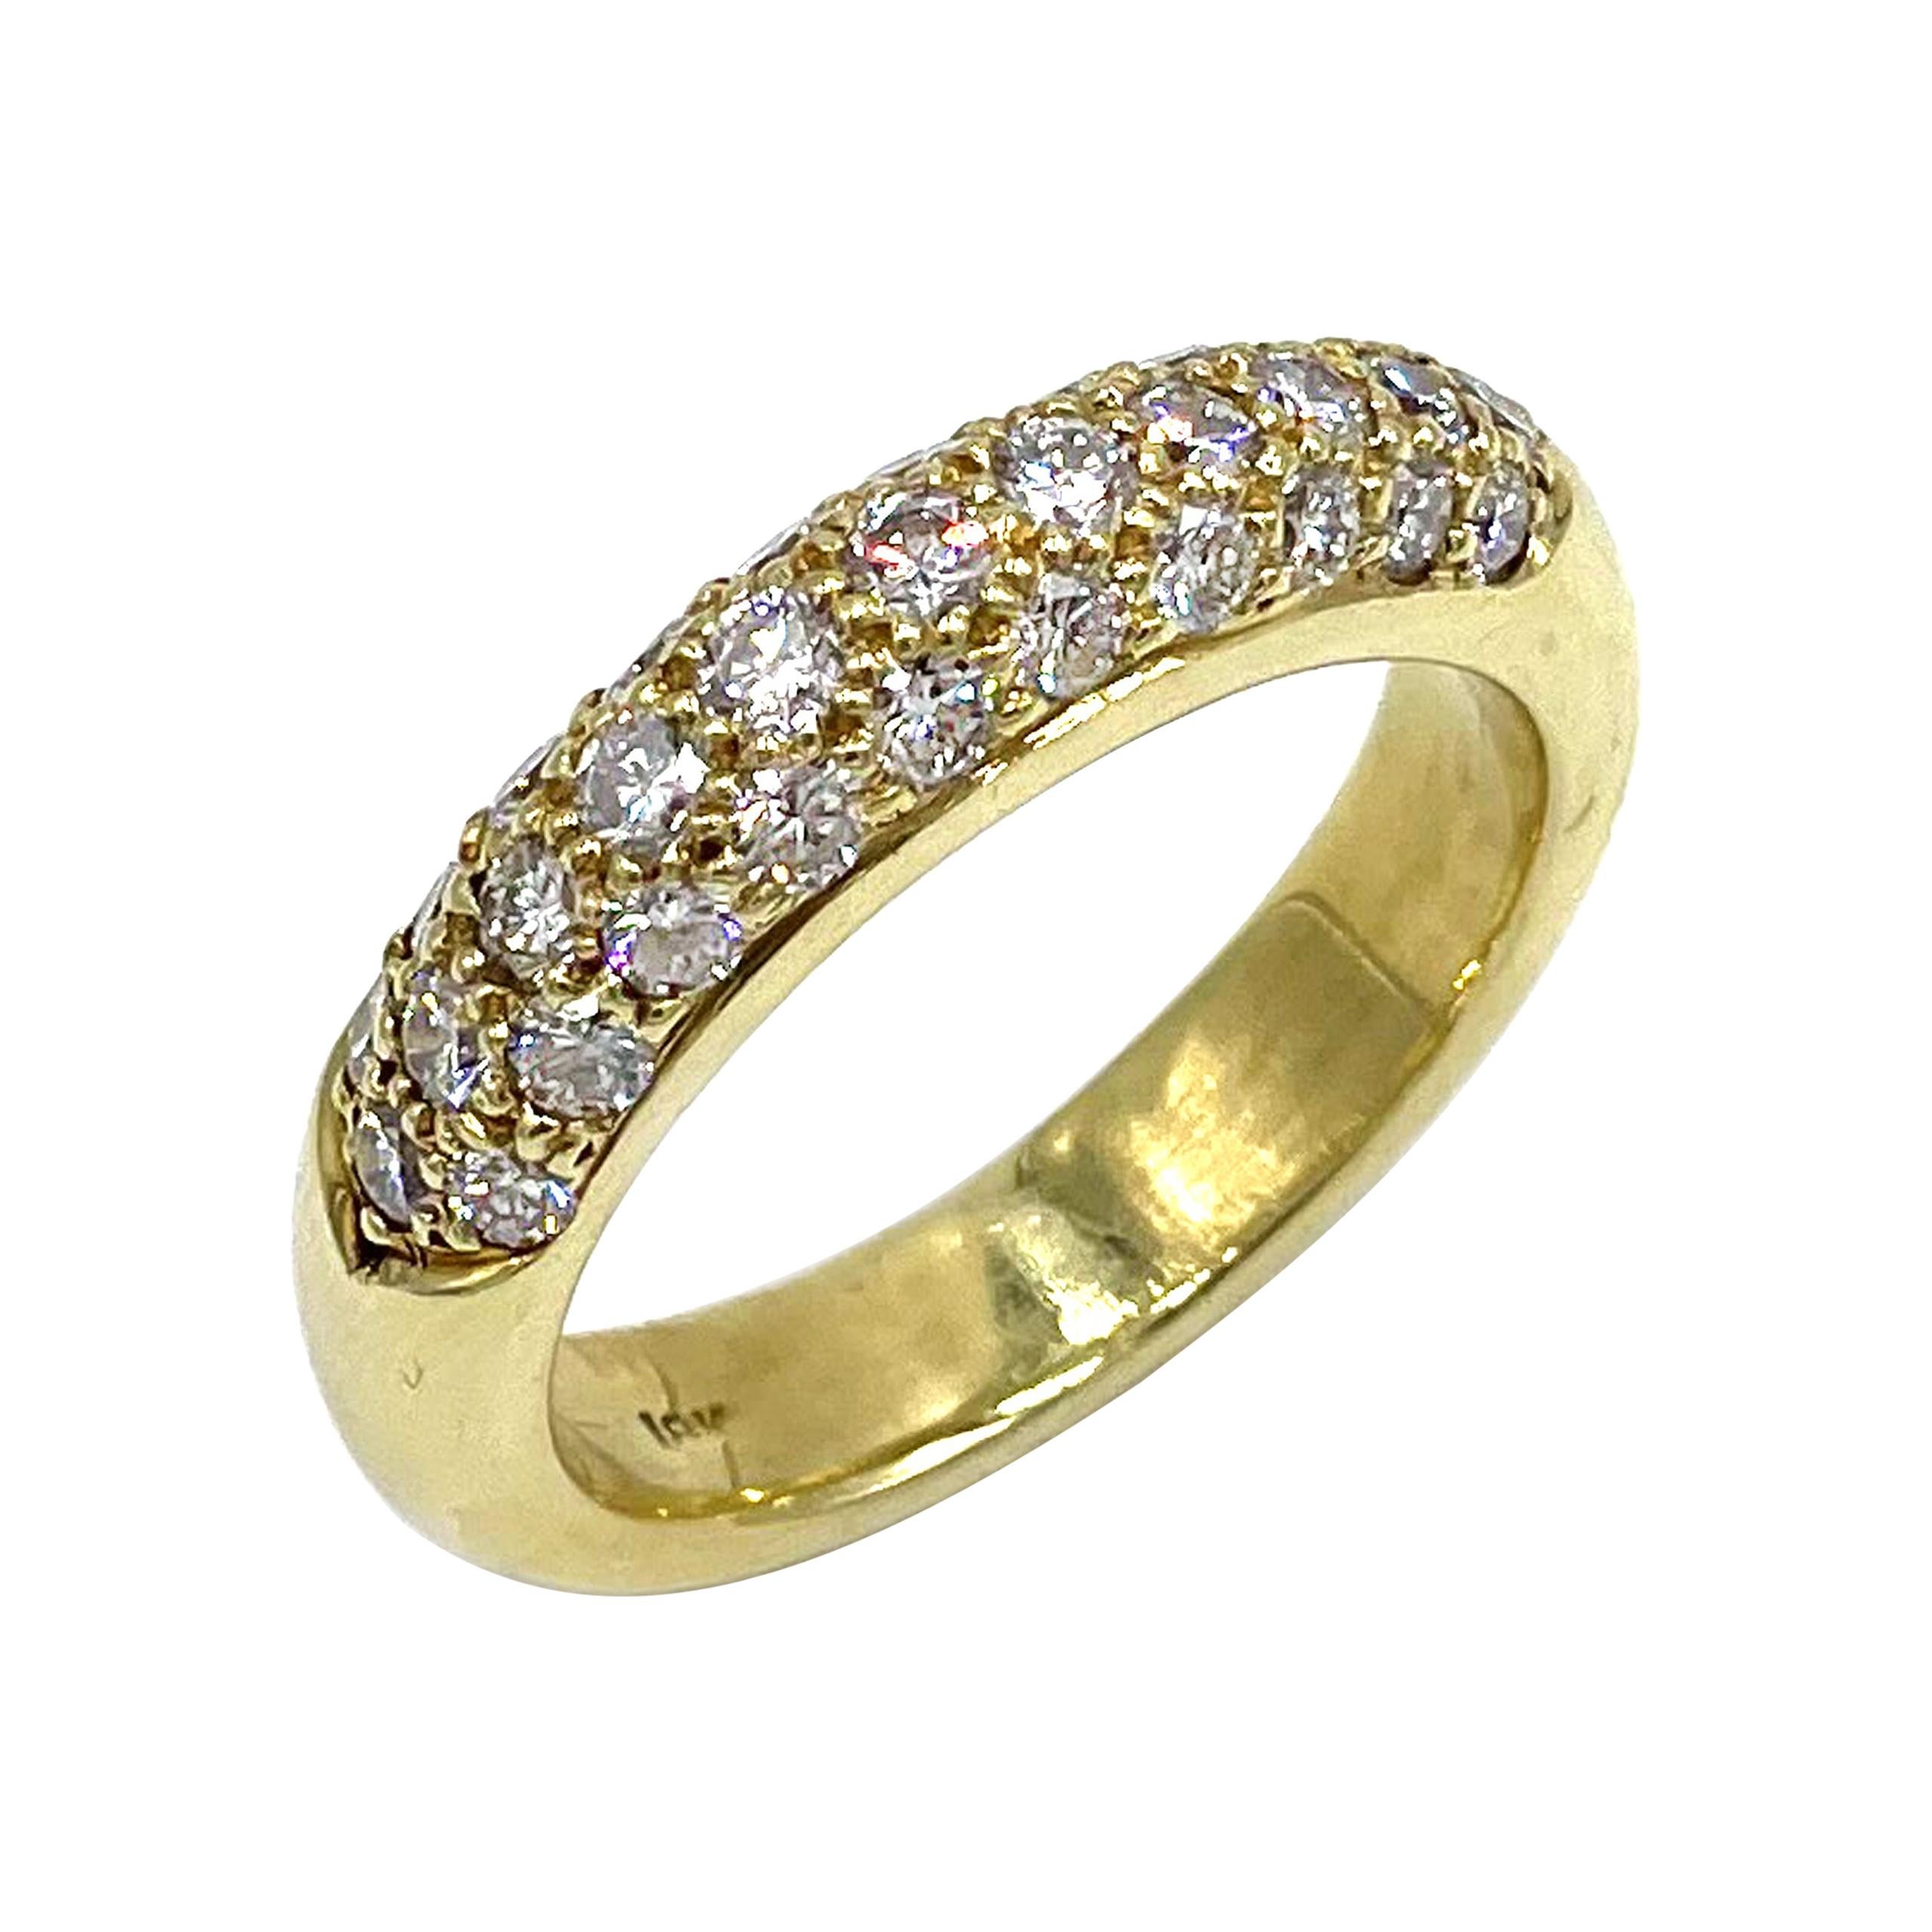 18k Yellow Gold Dome Ring with Pave Set Diamonds